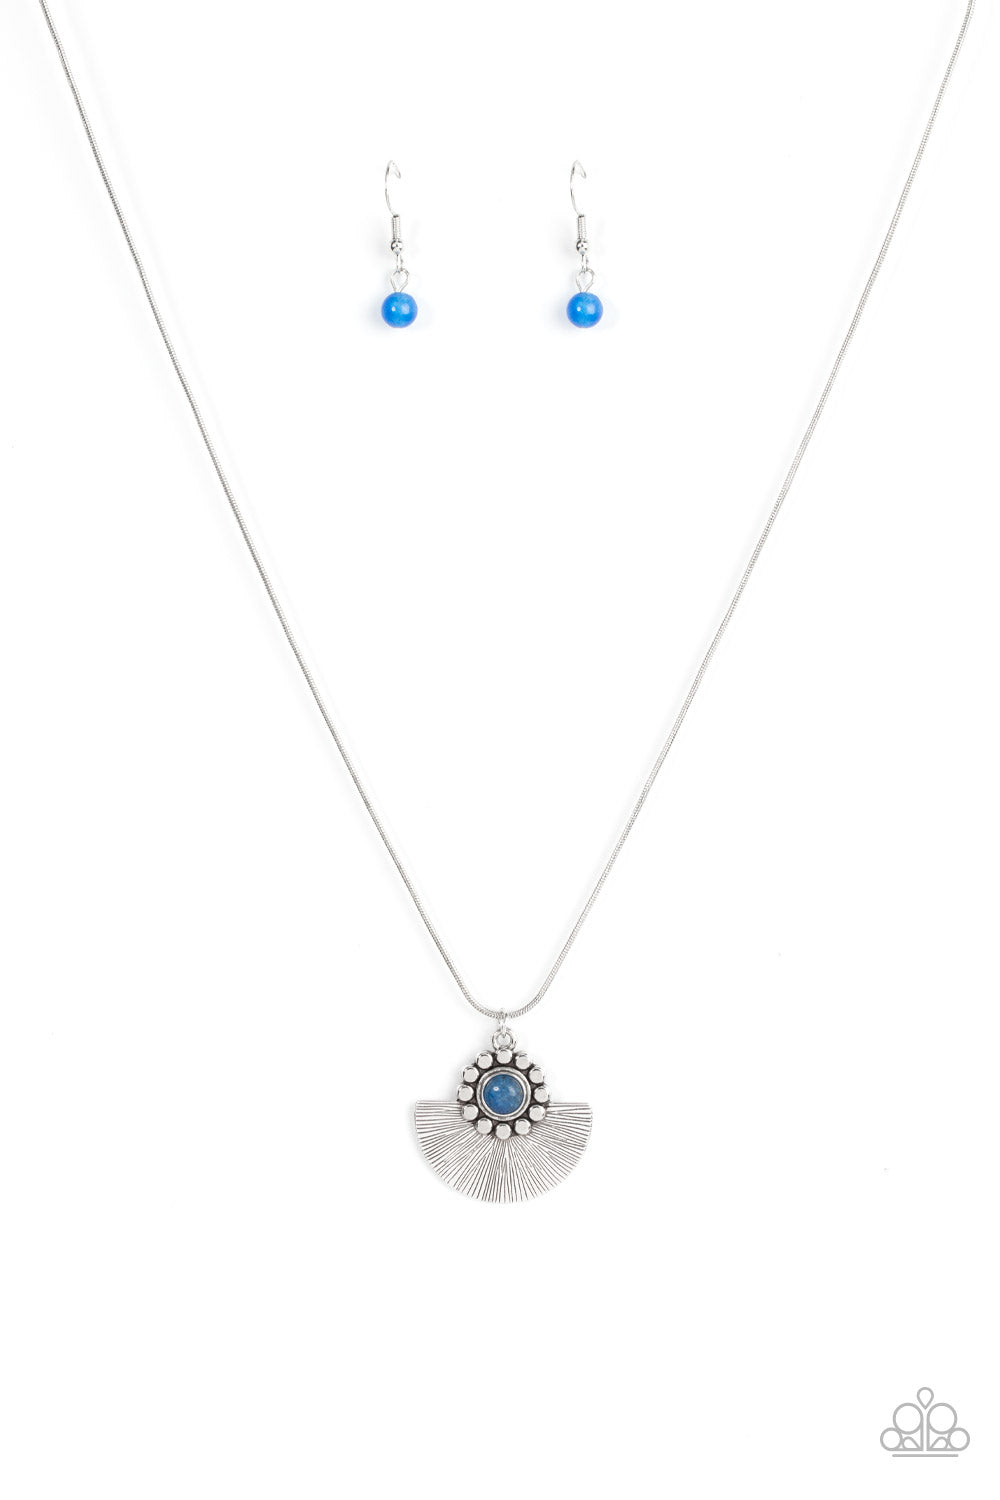 Paparazzi Accessories Magnificent Manifestation - Blue Bordered in a ring of flat silver studs, a mystical blue bead adorns the top of a textured silver half moon pendant that glides along a rounded silver snake chain for an ethereal fashion. Features an